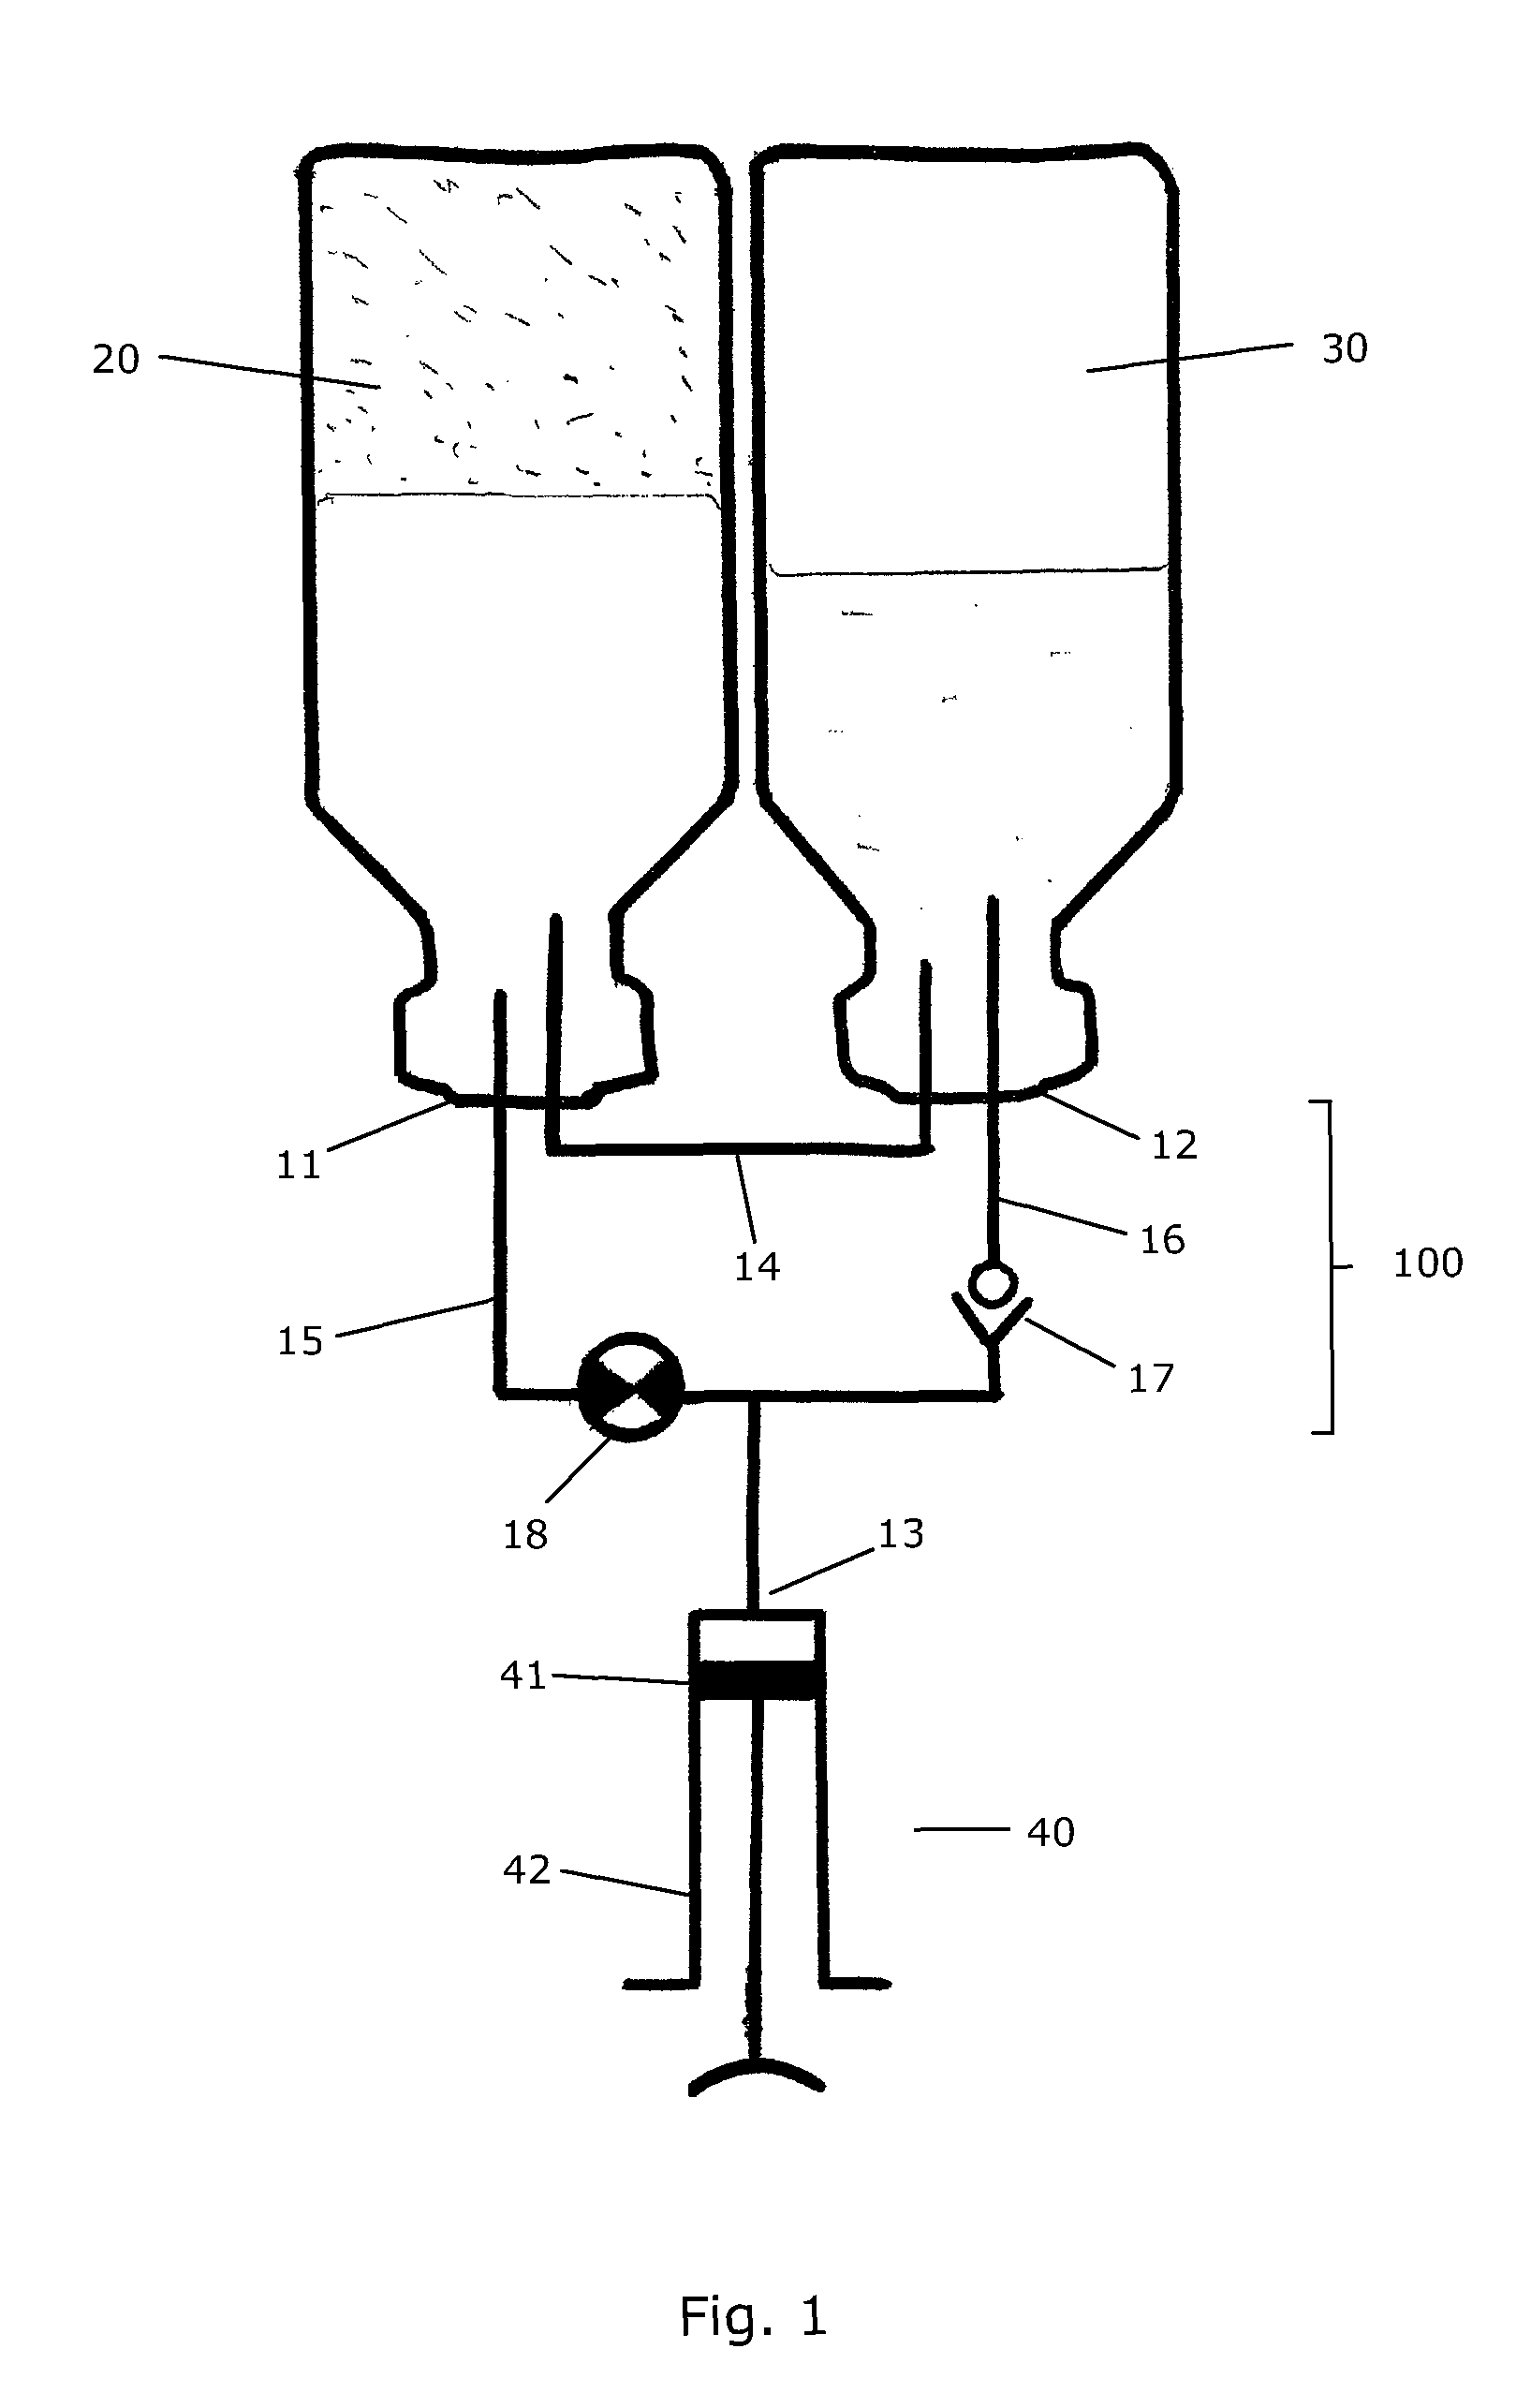 Transfer system for forming a drug solution from a lyophilized drug